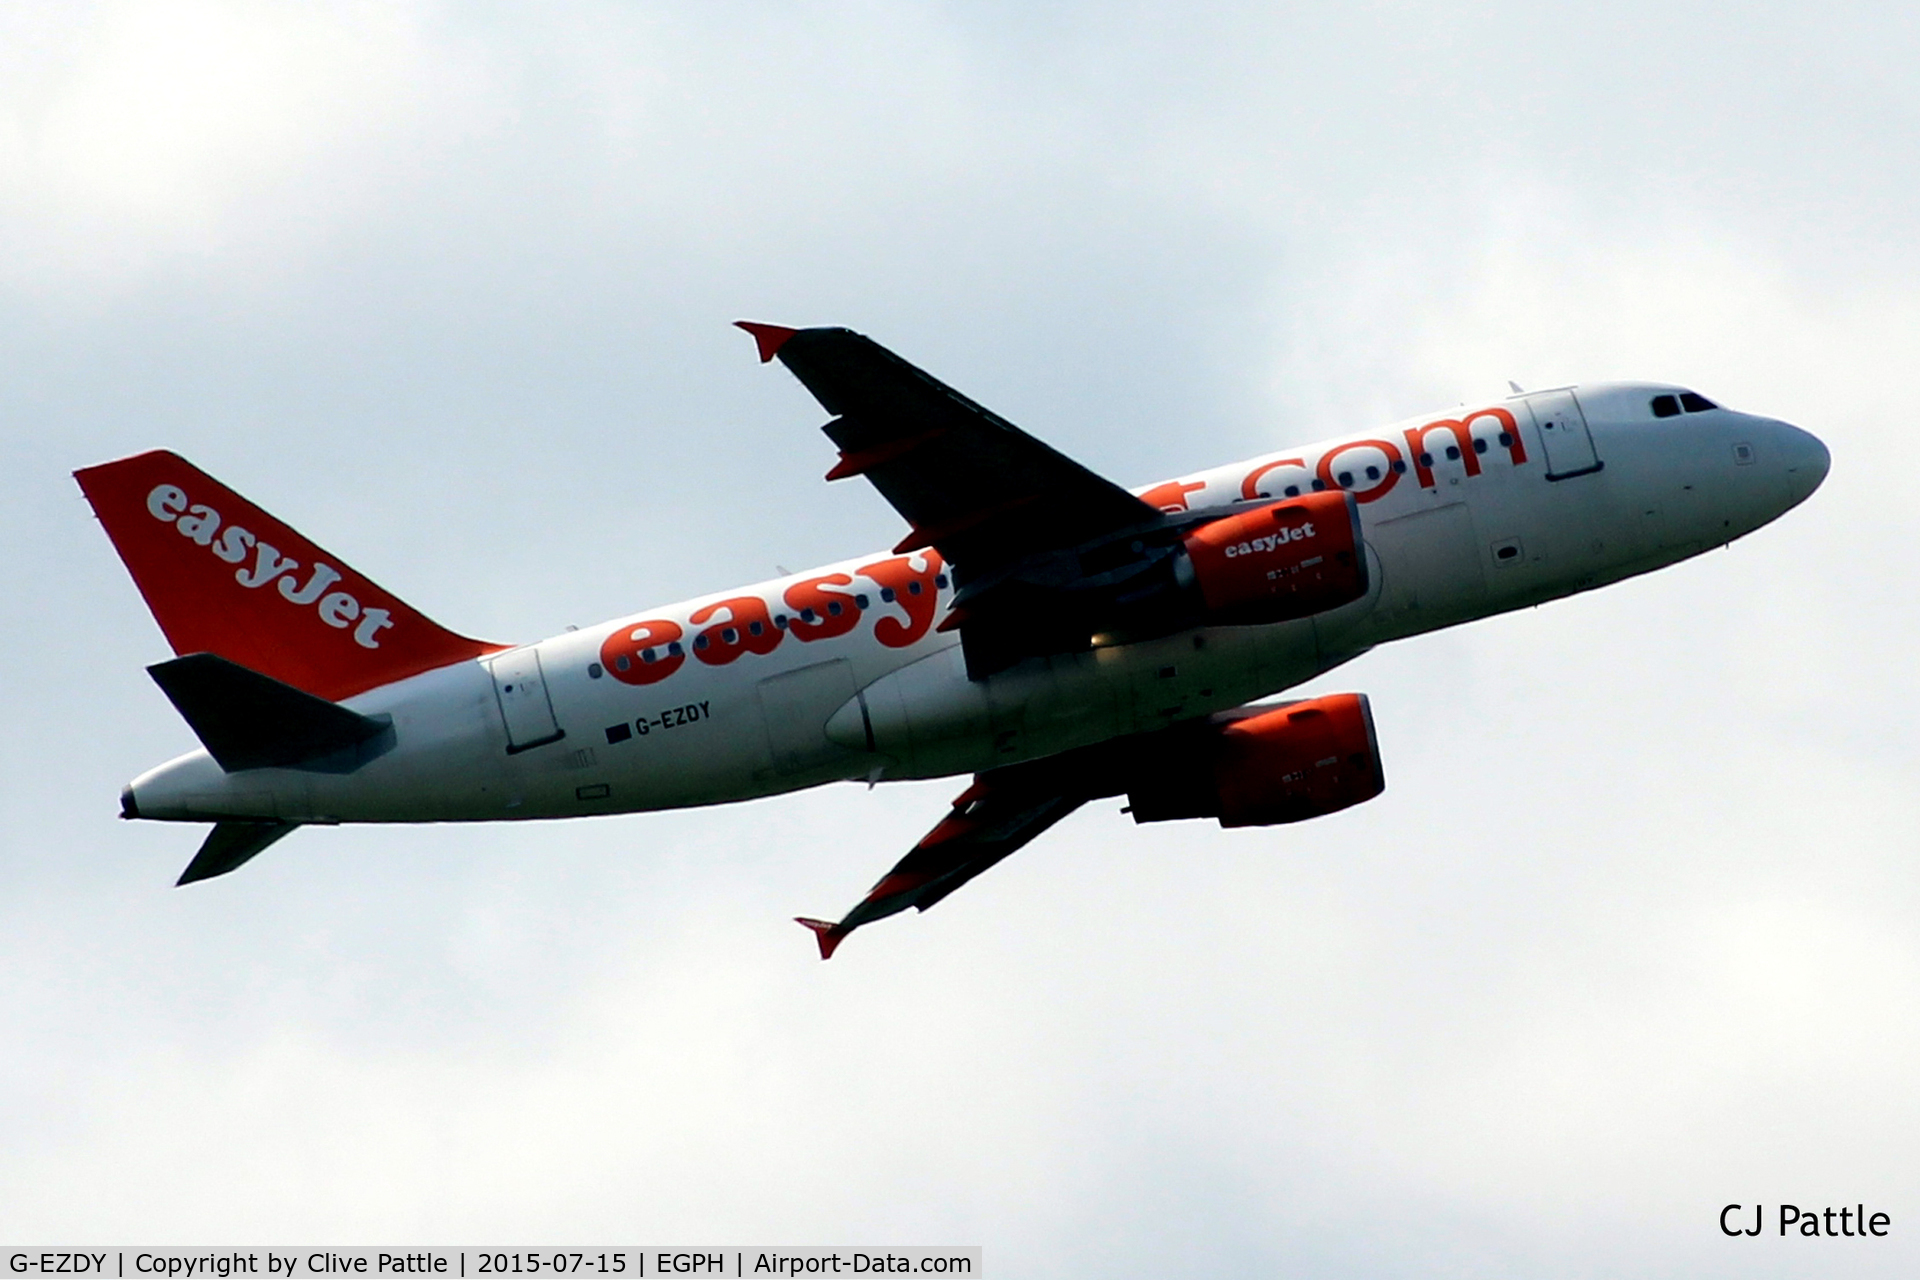 G-EZDY, 2008 Airbus A319-111 C/N 3763, Viewed from the banks of the Firth of Forth after take-off from EGPH